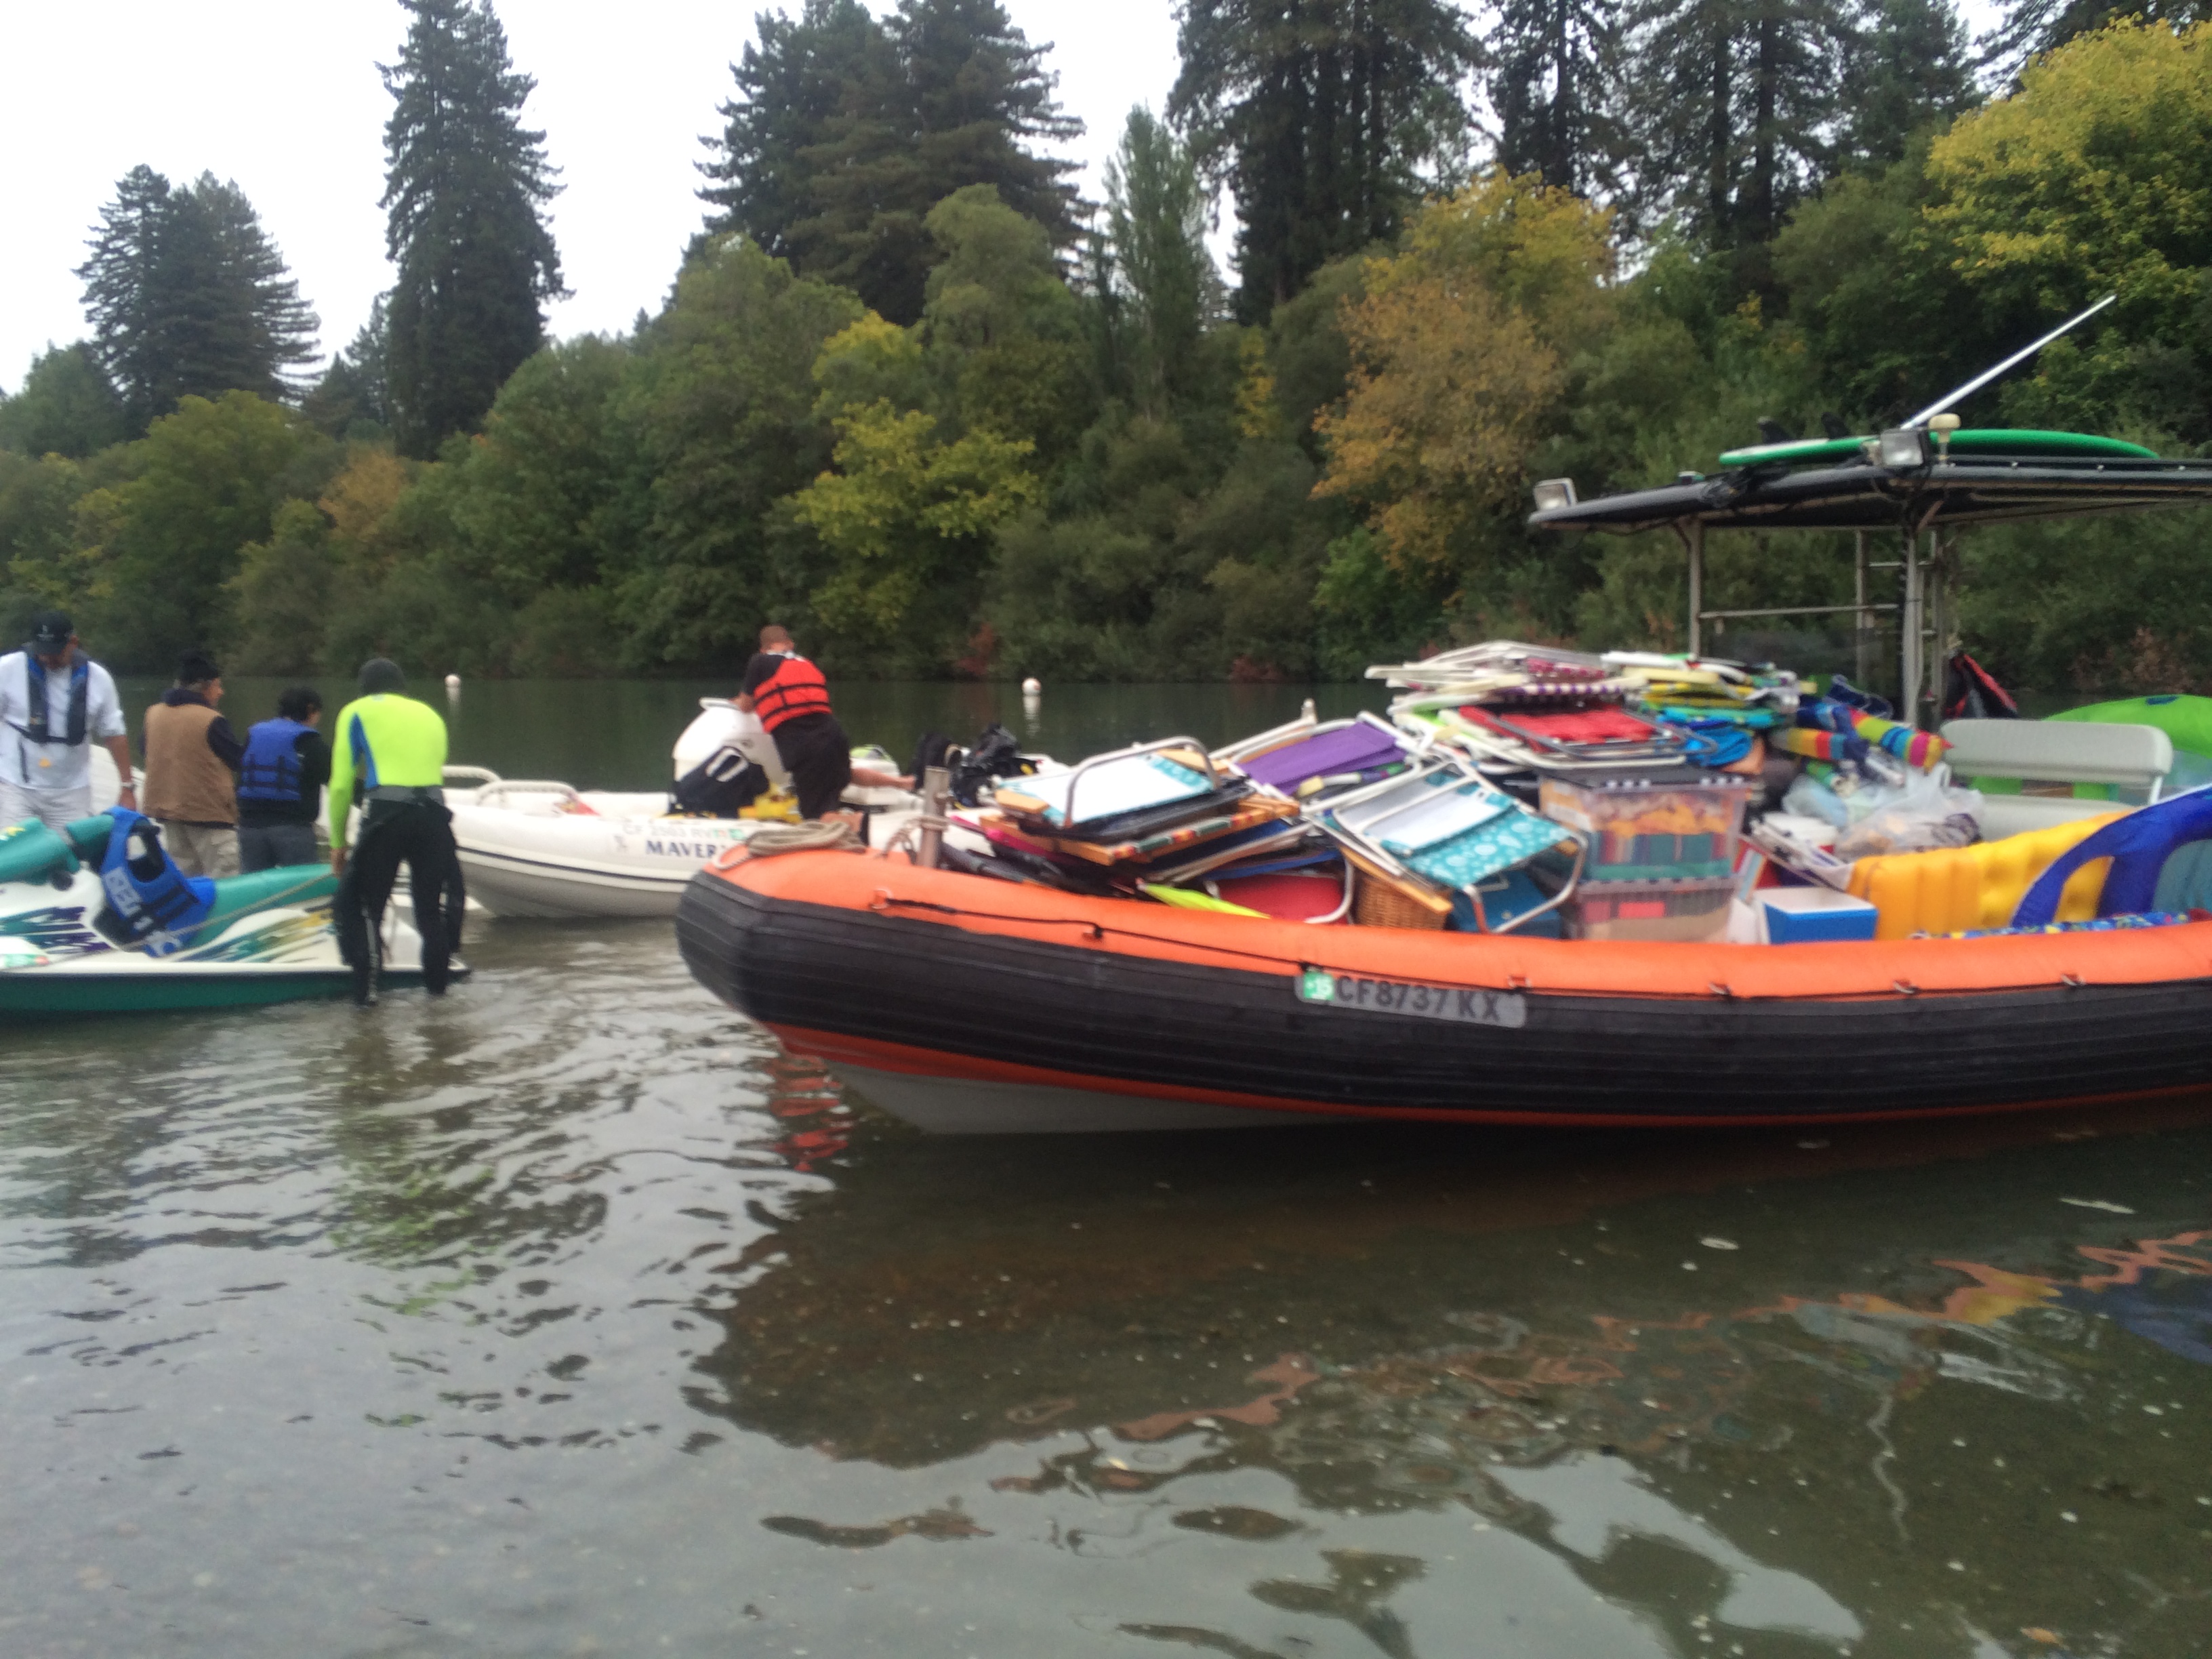 Vessel Tango and Captain Brent loading props for beach scene in remote location 5 miles up the Russian river